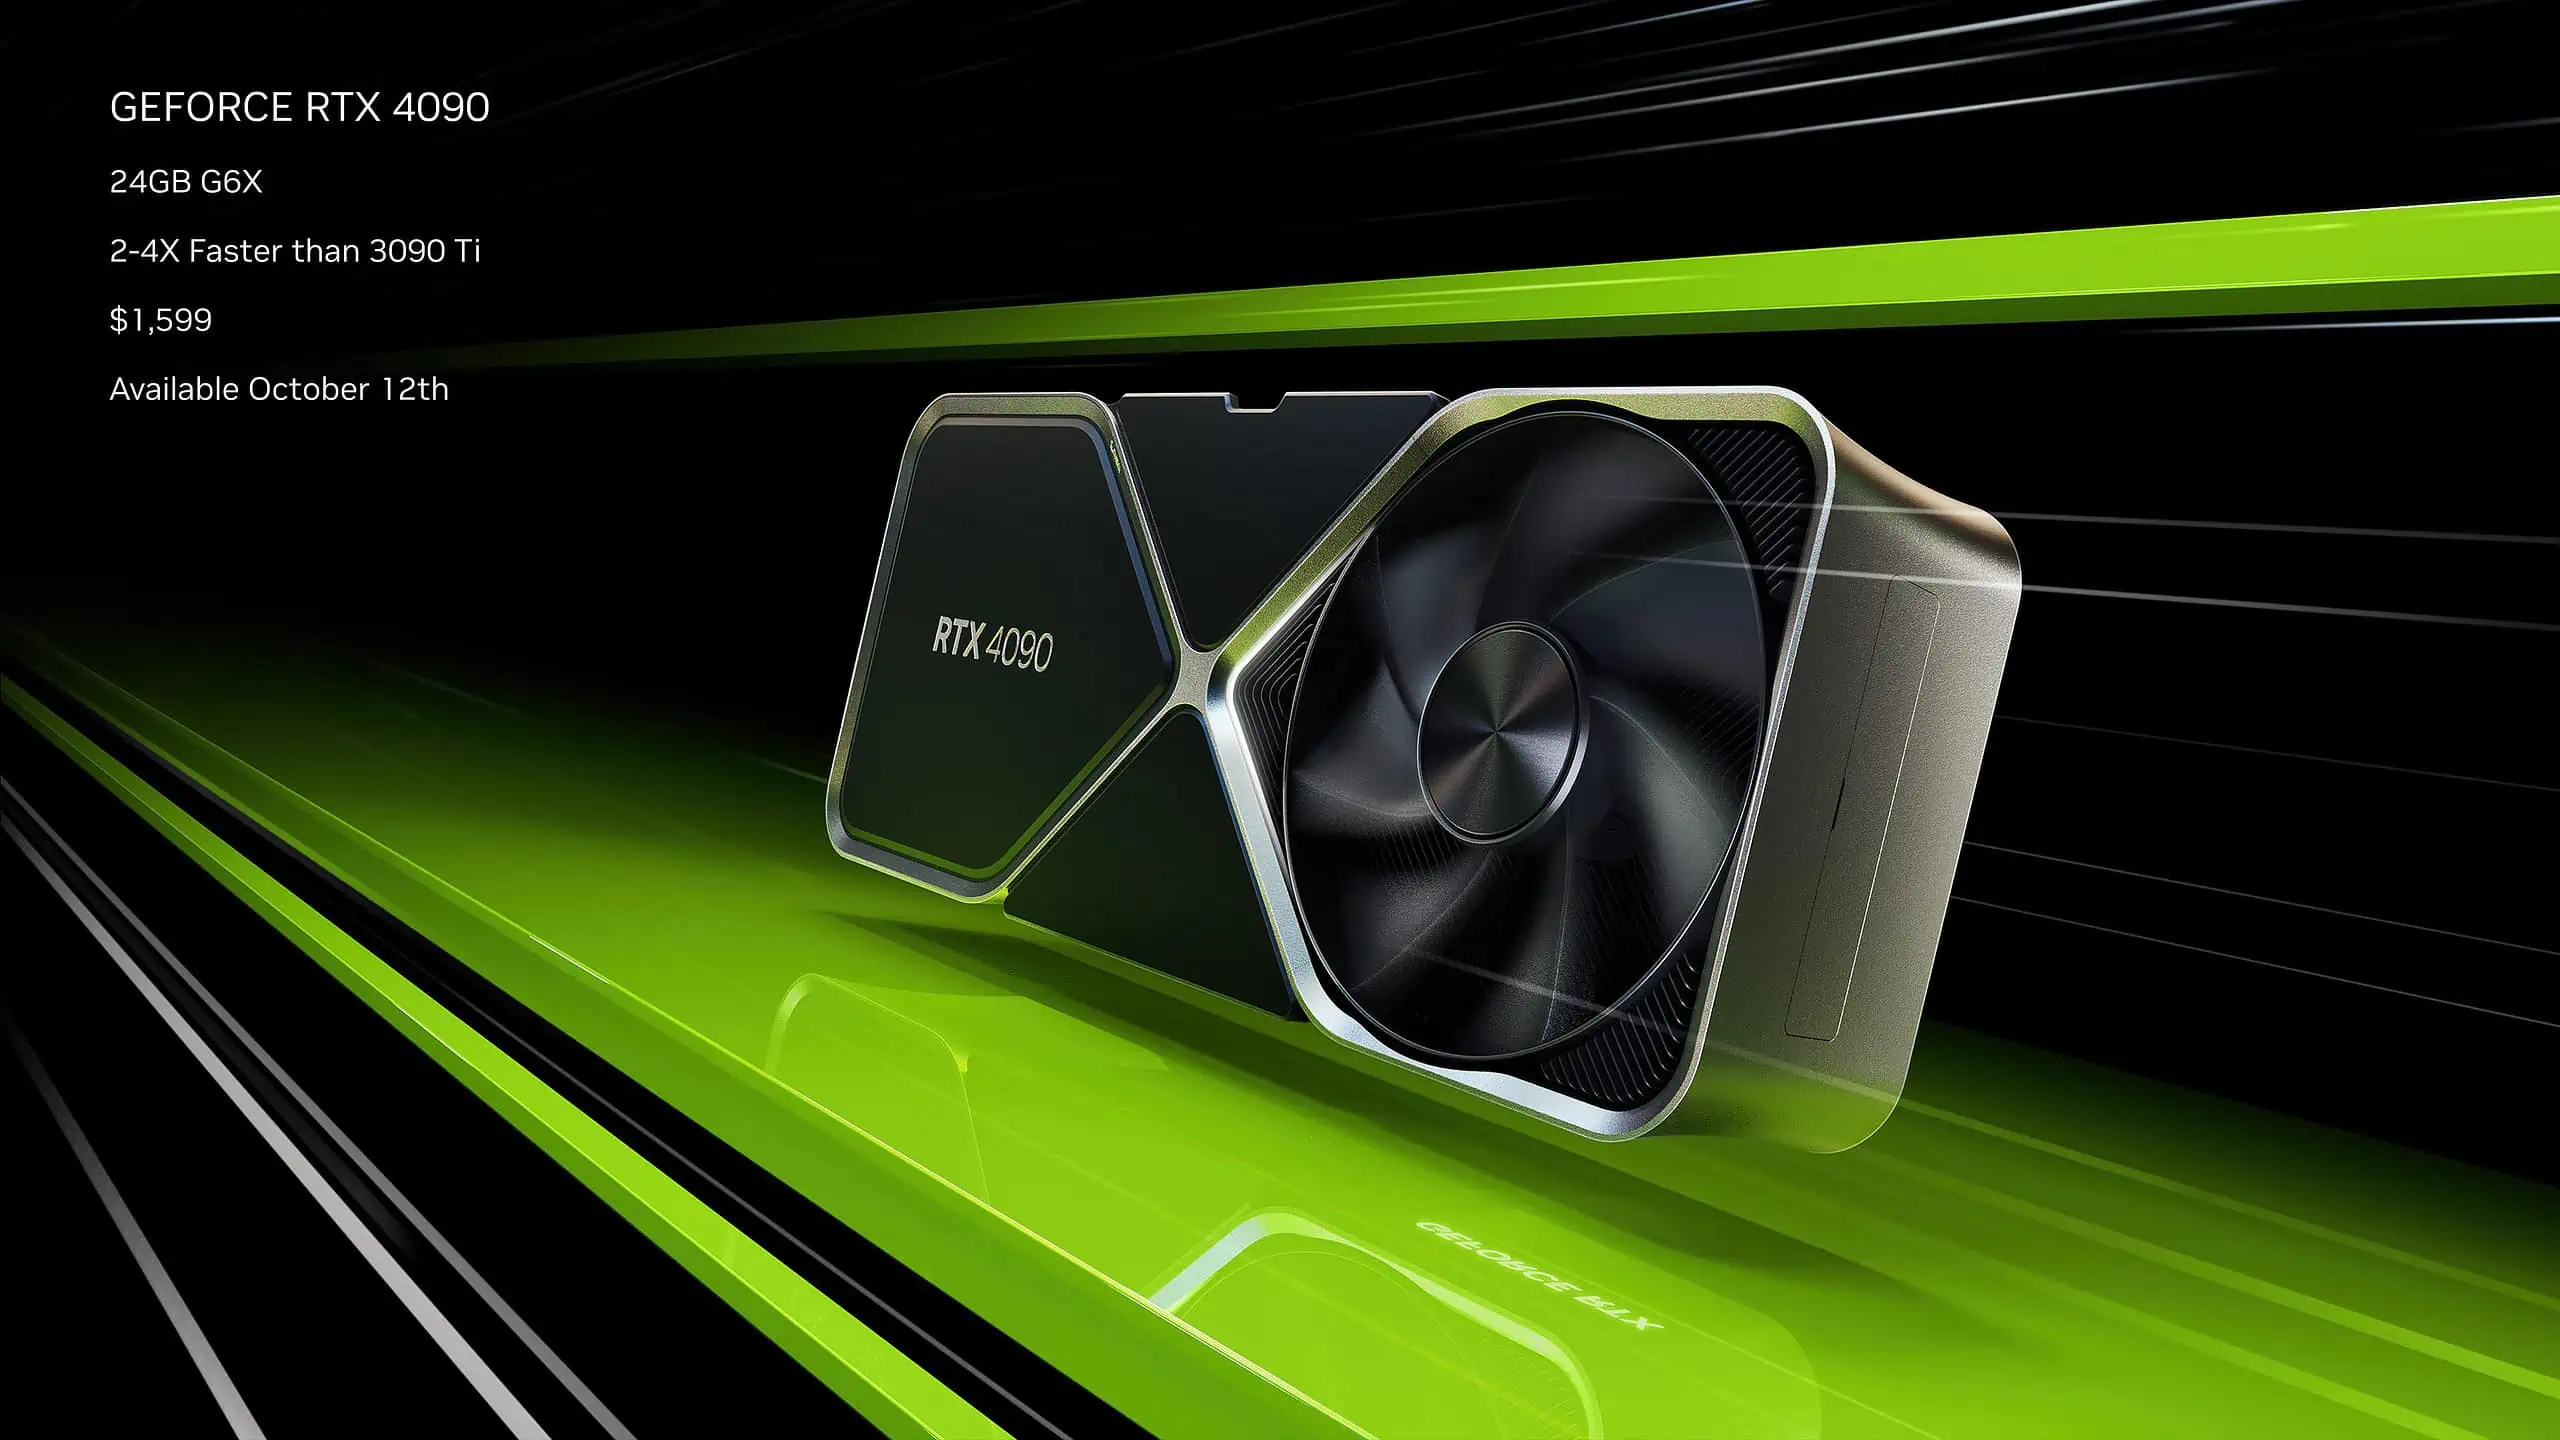 Nvidia unveils GeForce RTX 40 Series GPUs with new Ada Lovelace Architecture, DLSS 3